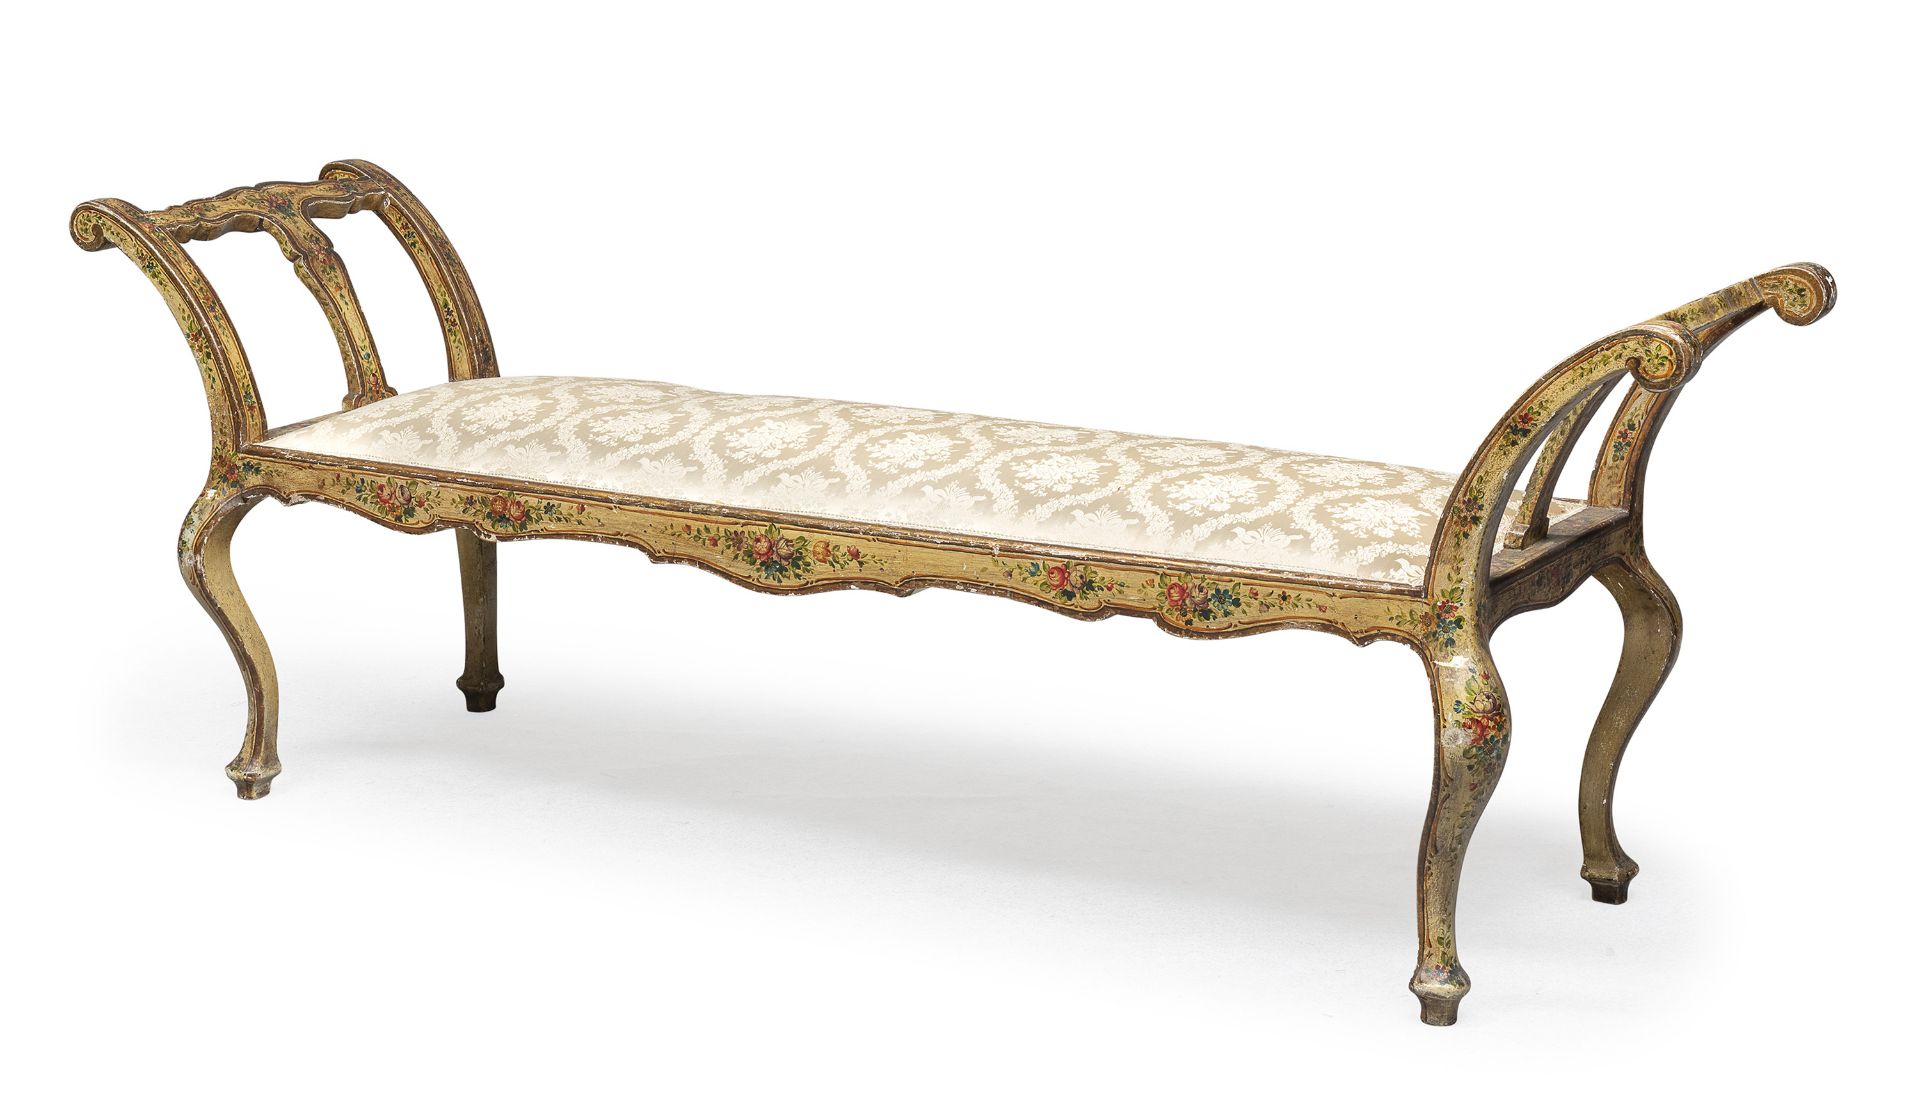 LACQUERED WOODEN BENCH VENETIAN STYLE 19th CENTURY